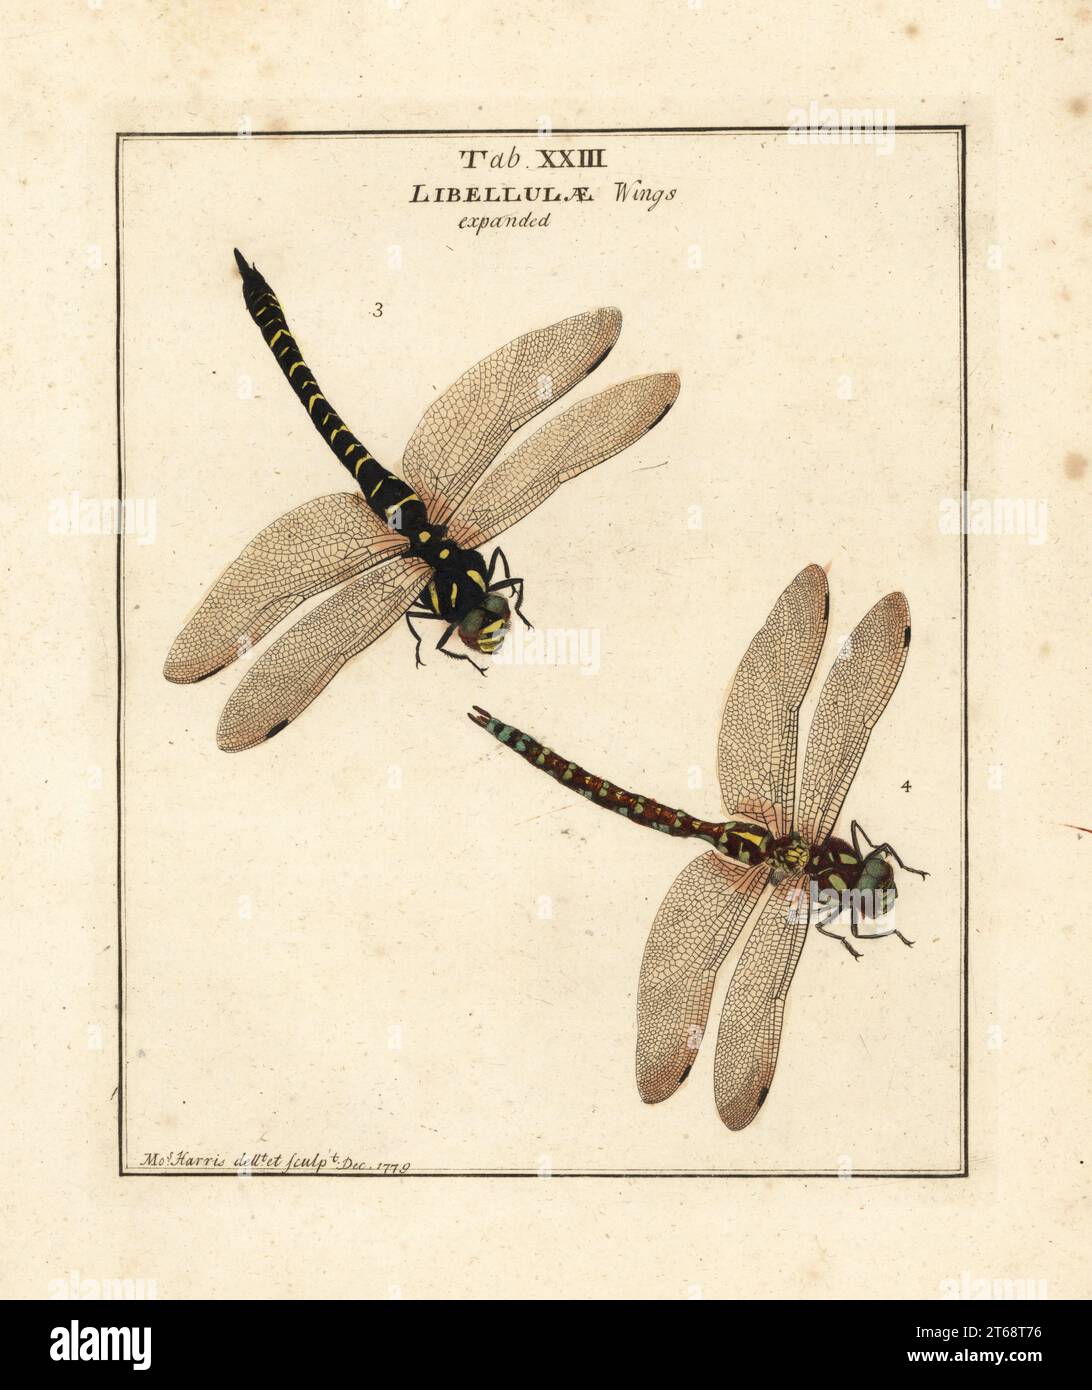 Golden-ringed dragonfly, Cordulegaster boltonii, female 3, and southern hawker or blue hawker dragonfly, Aeshna cyanea, male 4. Libellula forcipata, Libellula anguis. Handcoloured copperplate engraving drawn and engraved by Moses Harris from his own Exposition of English Insects, Including the several Classes of Neuroptera, Hymenoptera, Diptera, or Bees, Flies and Libellulae, White and Robson, London, 1782. Stock Photo